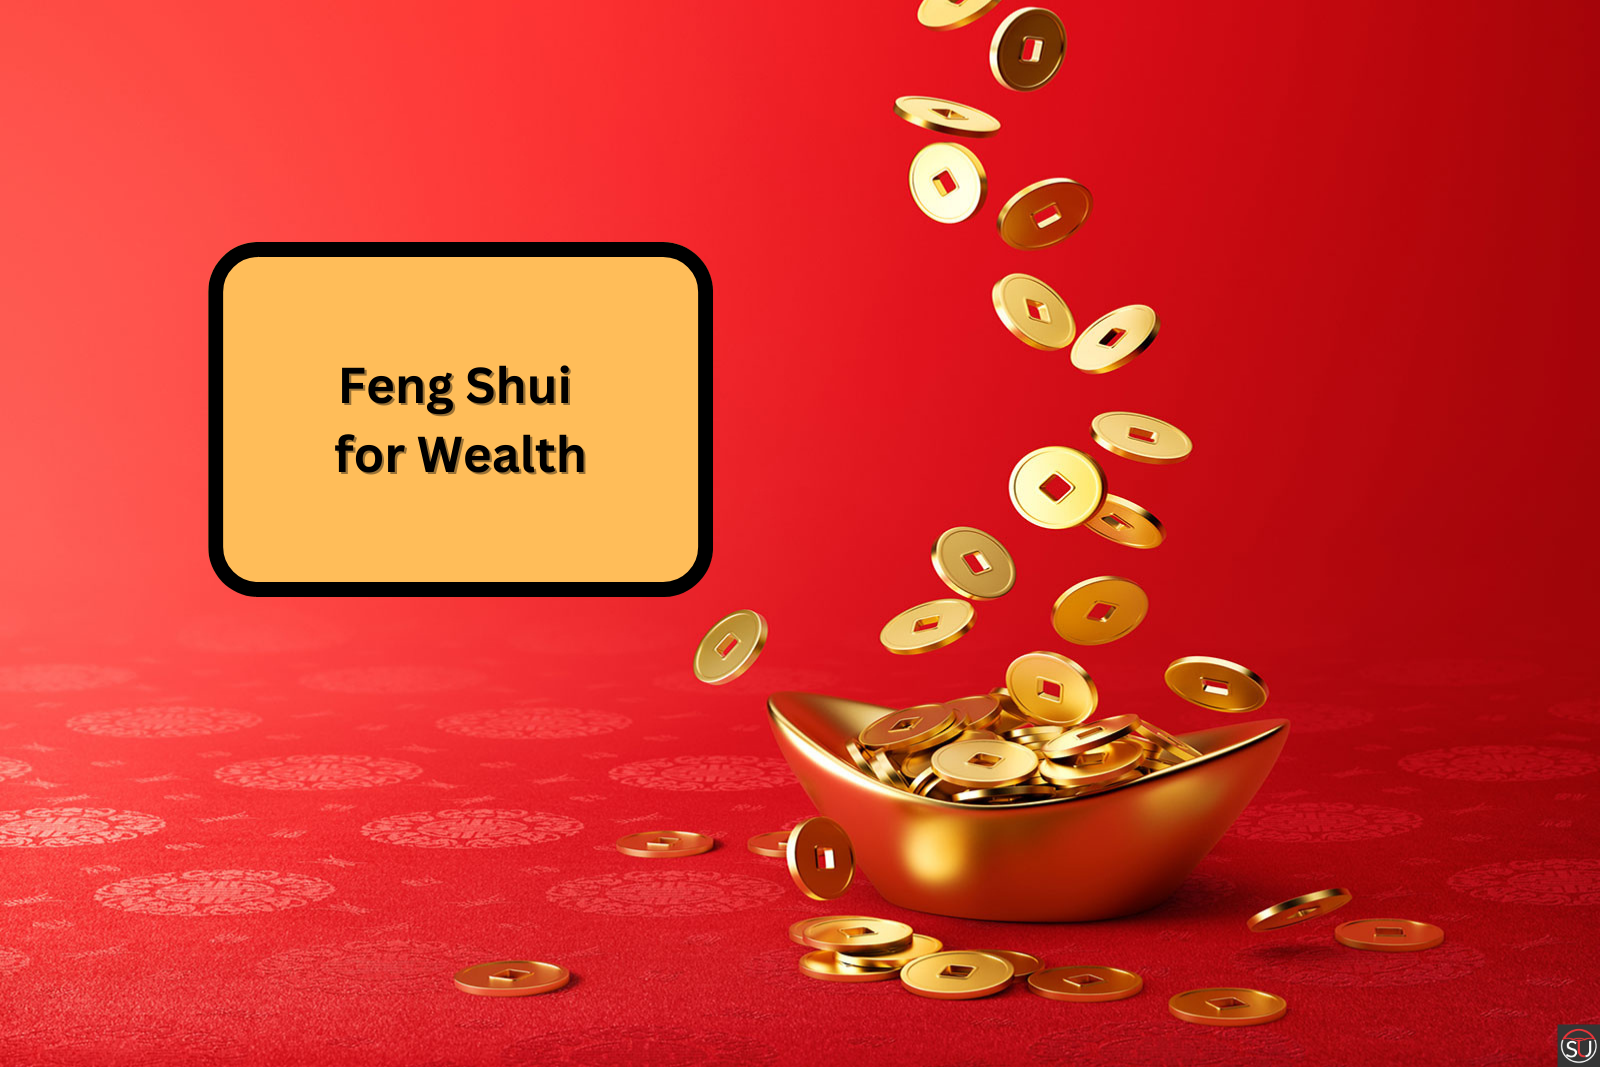 Feng shui for wealth